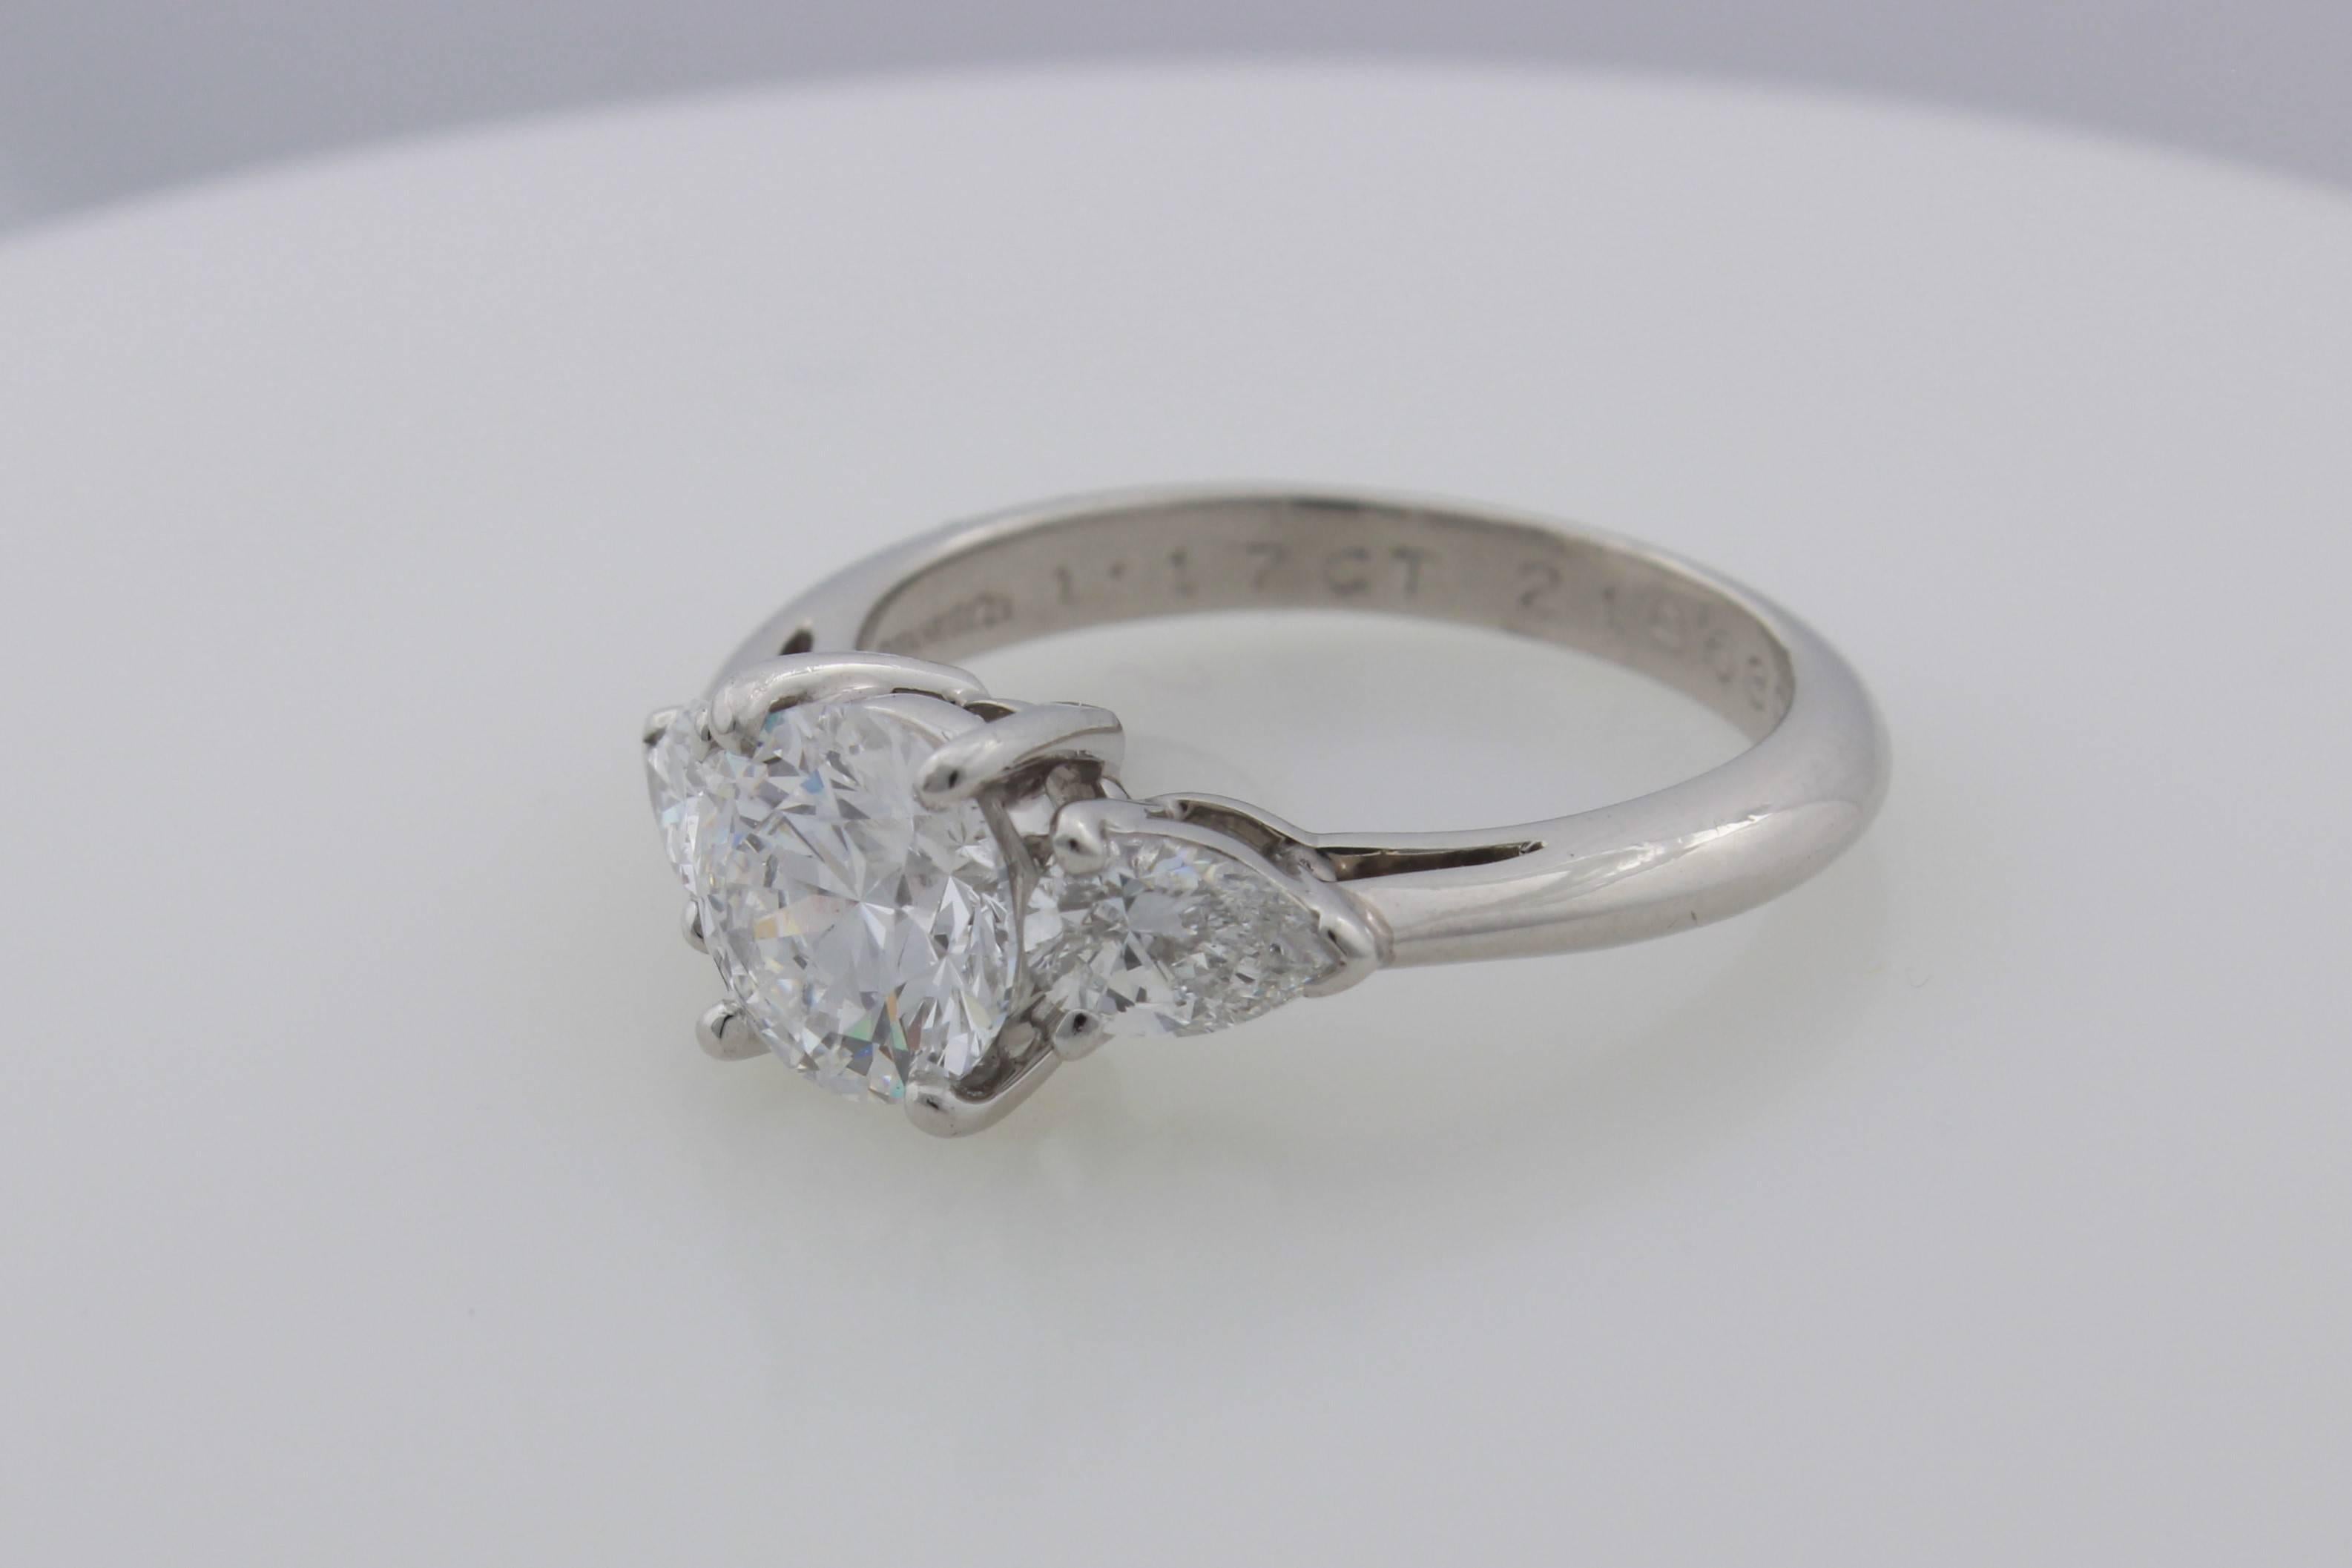 Classic Tiffany & Co. Platinum 3 Diamond Ring containing a beautifully cut 1.17 carat D VS1 round brilliant diamond set with matching pear shaped side diamonds that total .48 carats.  The finger size is 5.25 and the ring is sizeable.  Tiffany & Co.